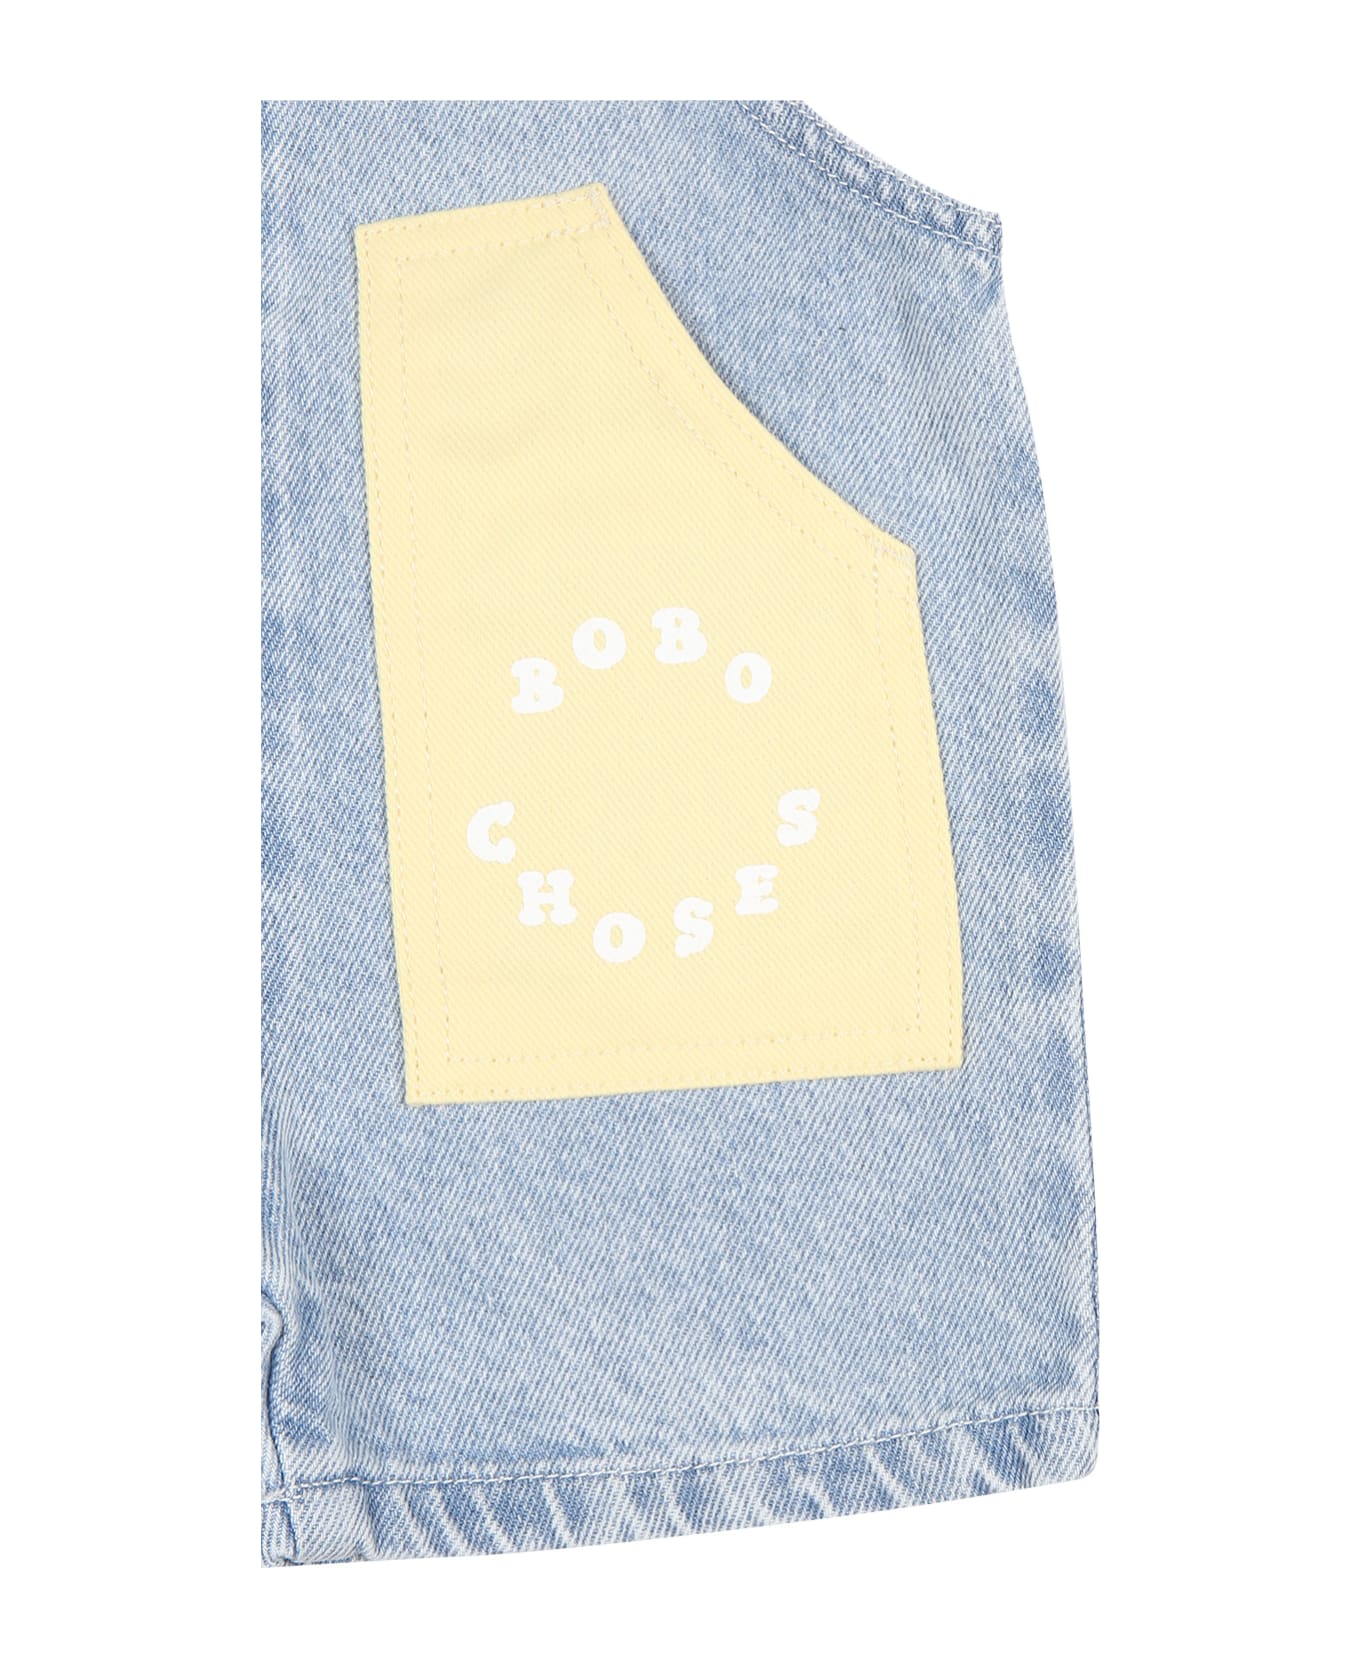 Bobo Choses Blue Dungarees For Baby Boy With Logo - Denim